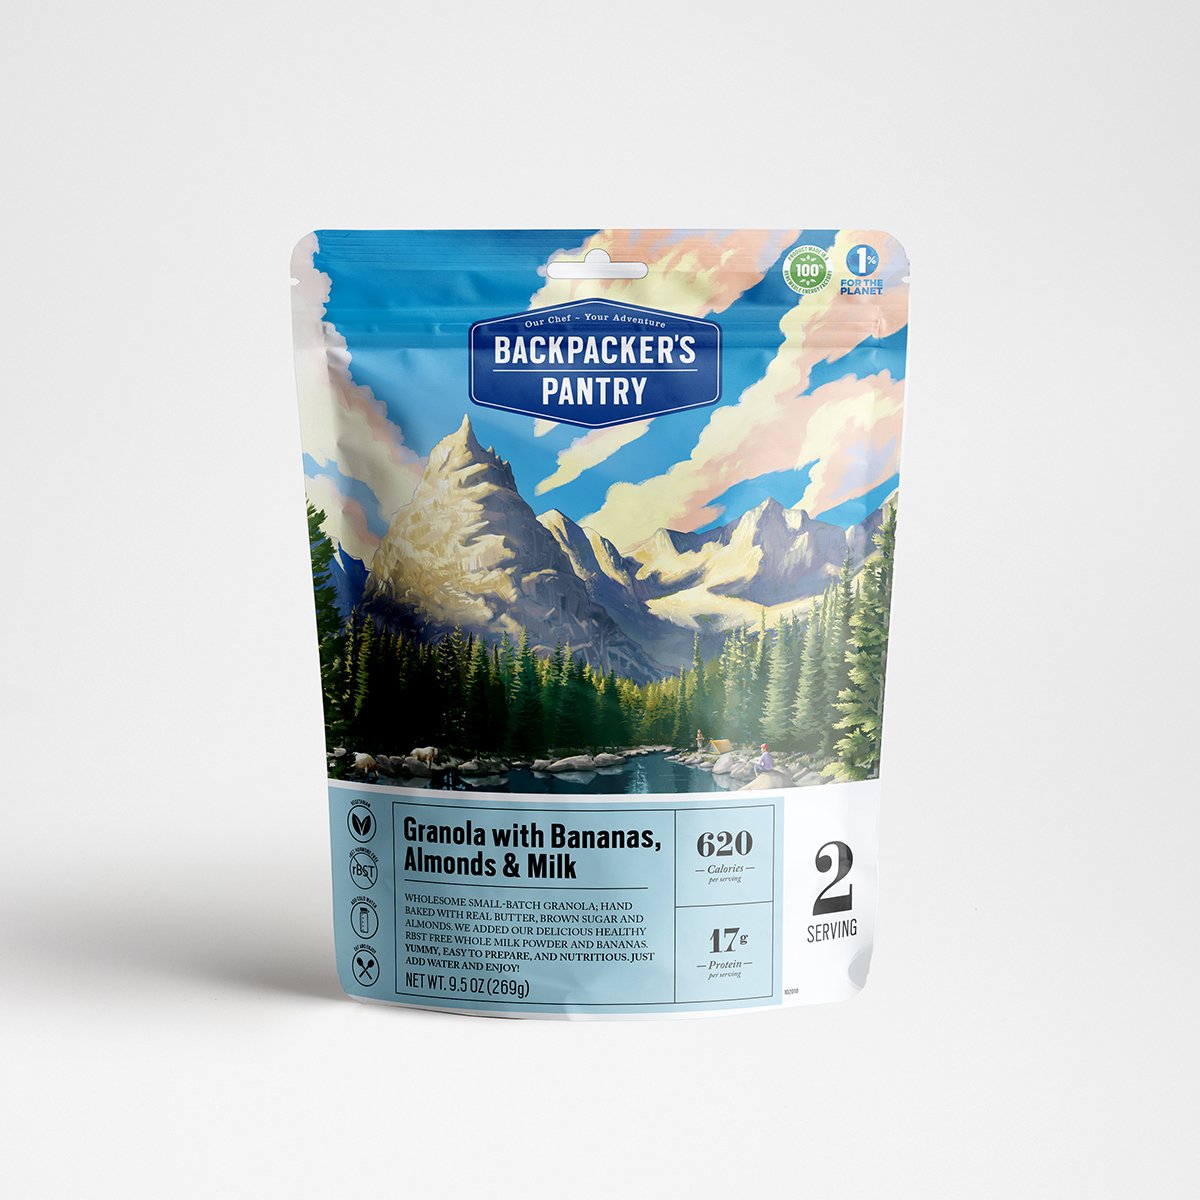 Backpacker's Pantry Granola With Bananas Almonds & Milk - Ascent Outdoors LLC